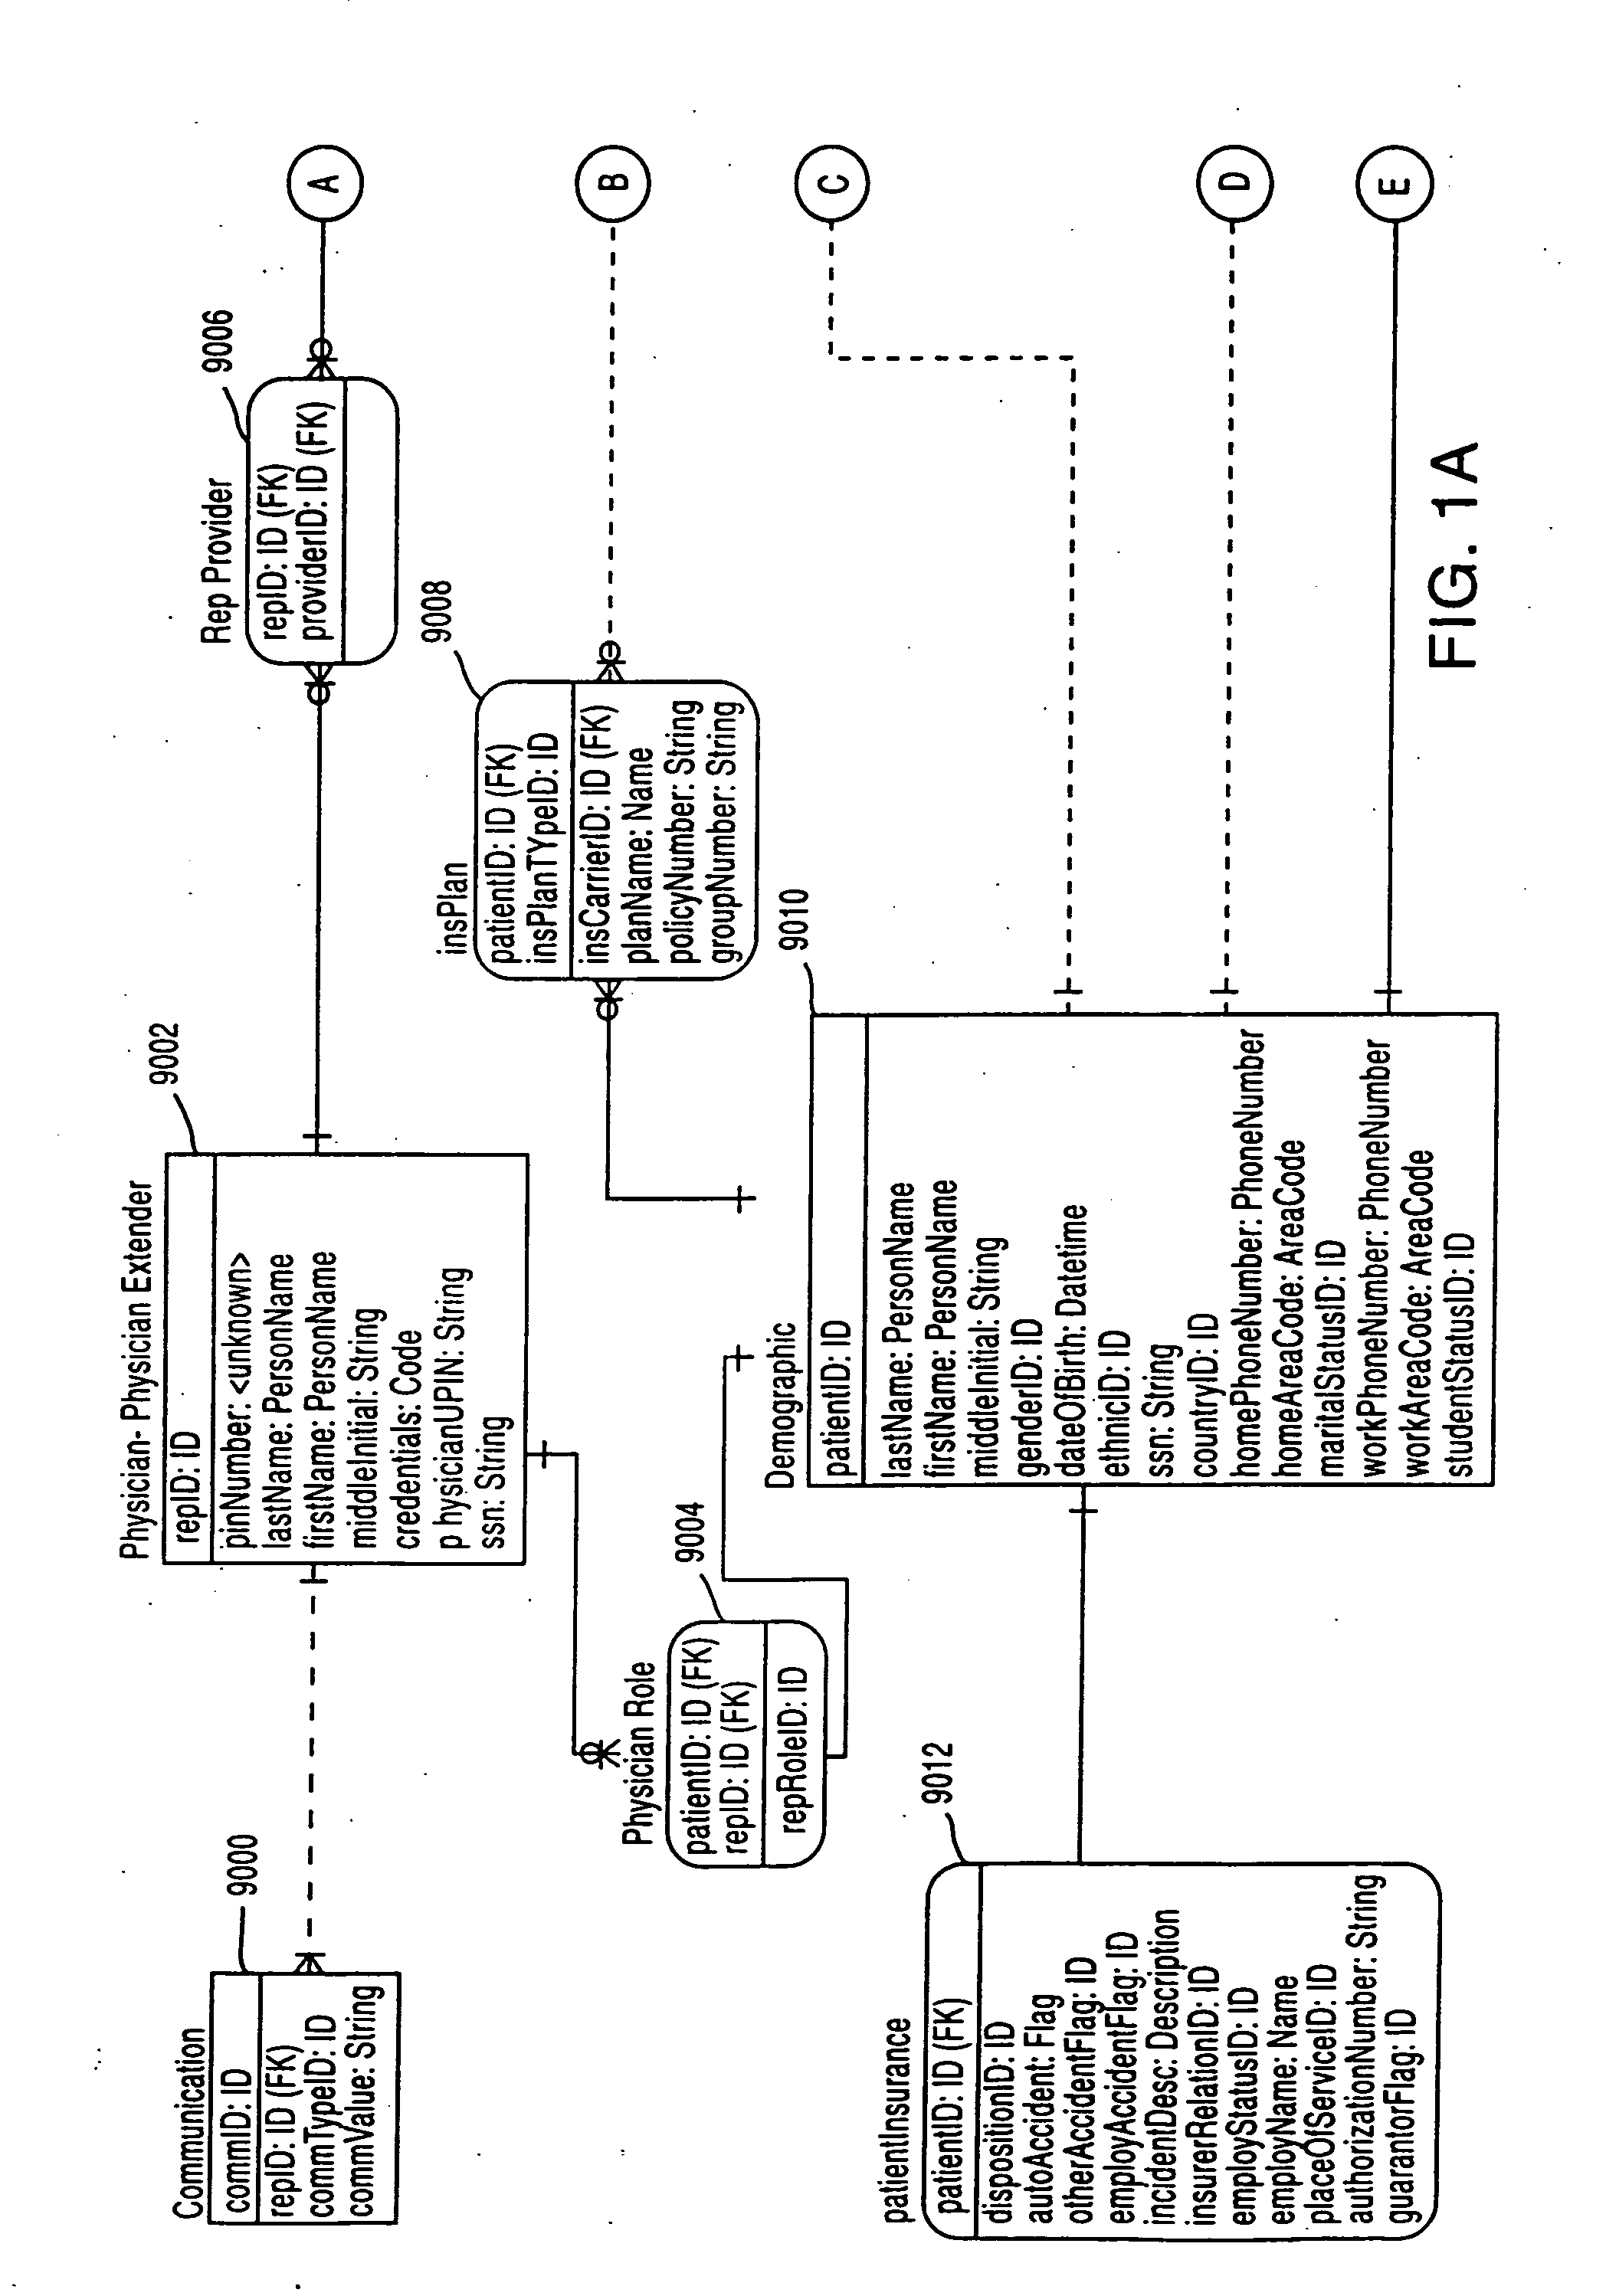 Video visitation system and method for a health care location